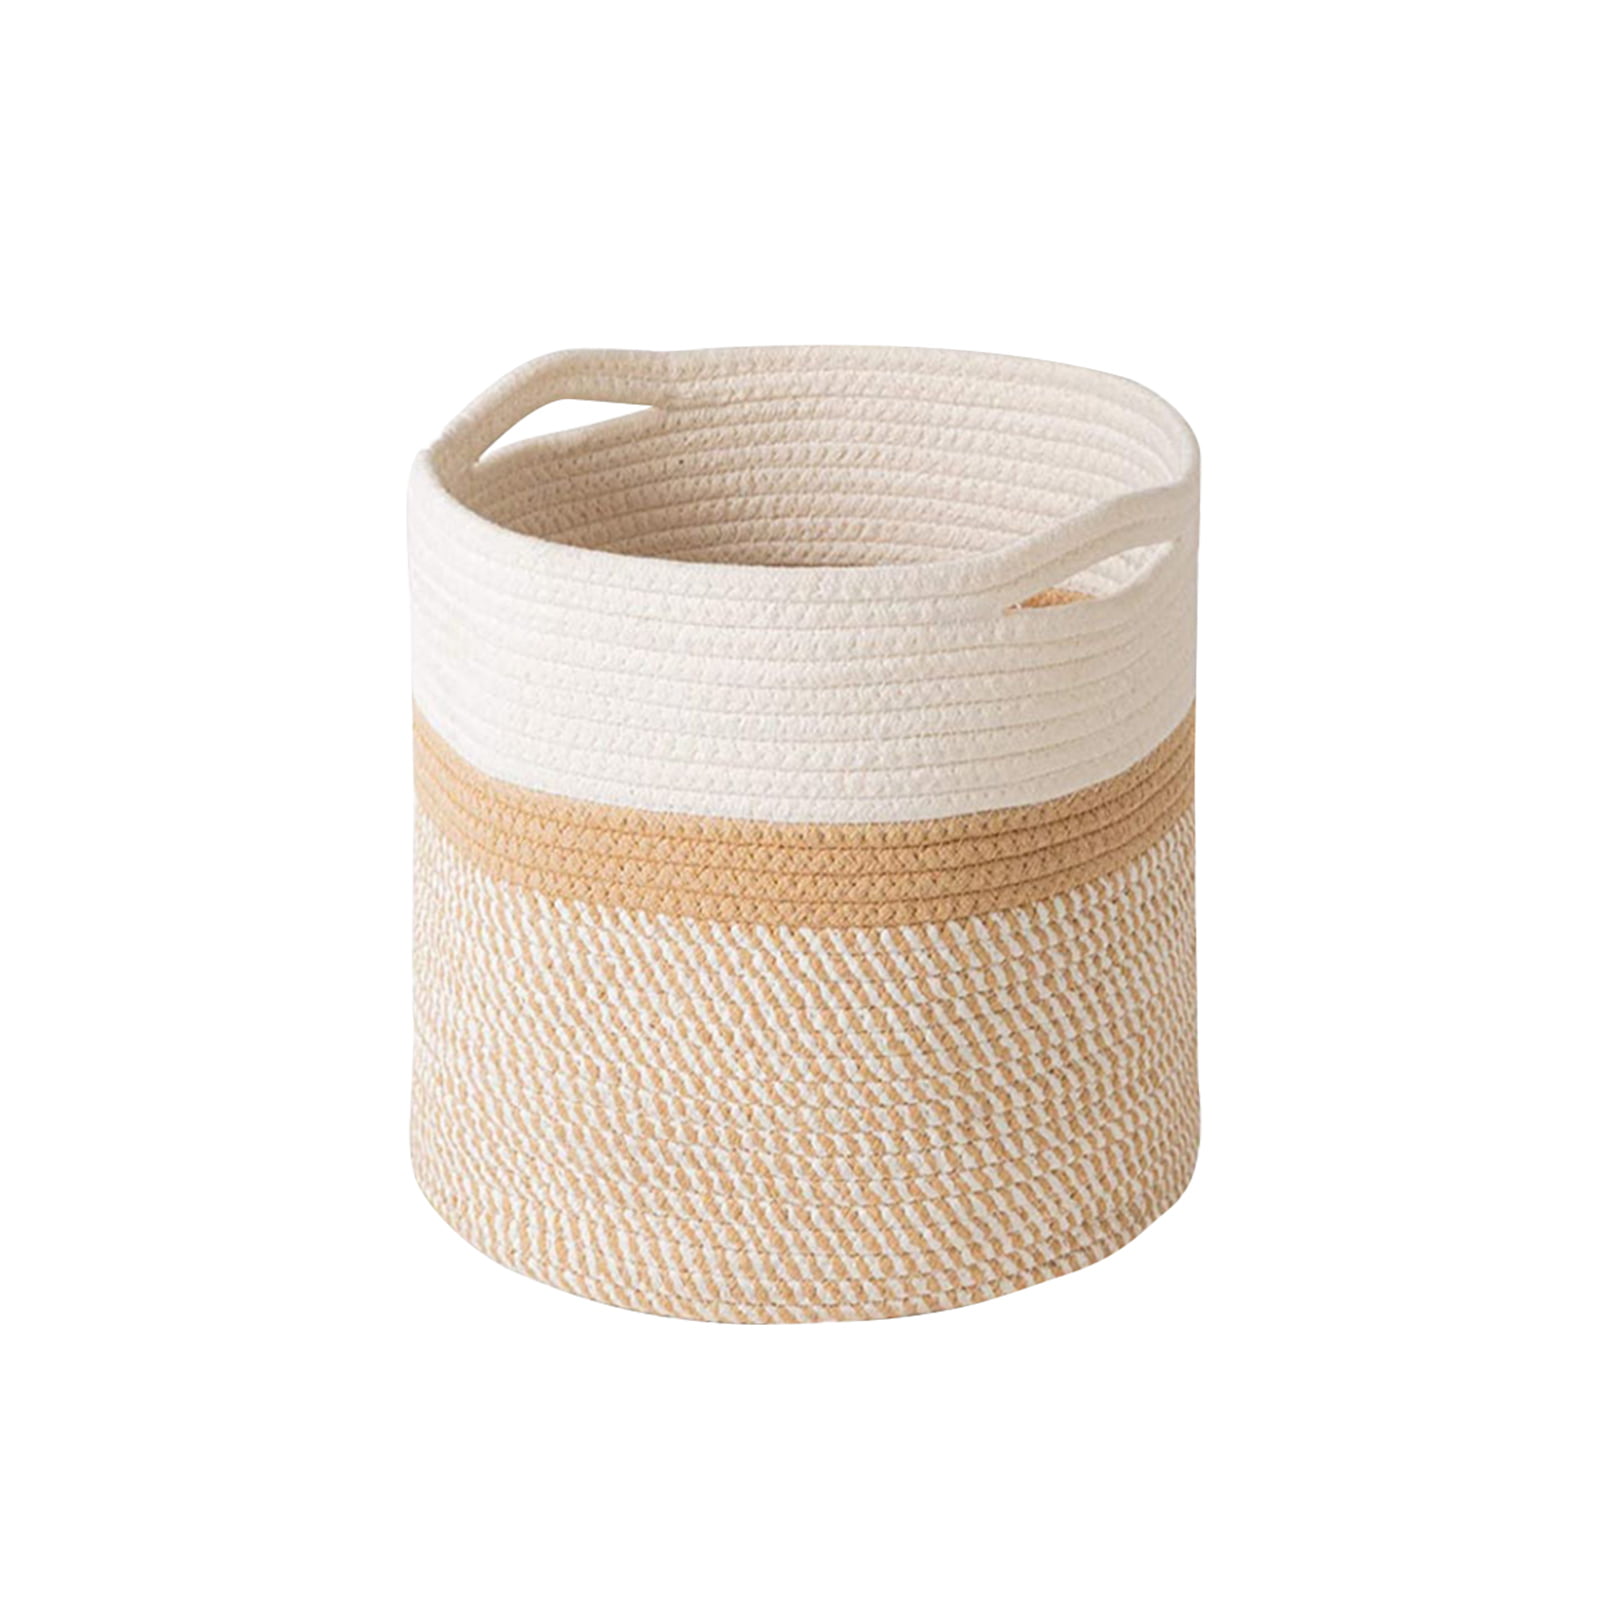 Woven Jute Flower Pot Storage Laundry Fabric Basket Braided Rope Home Indoor